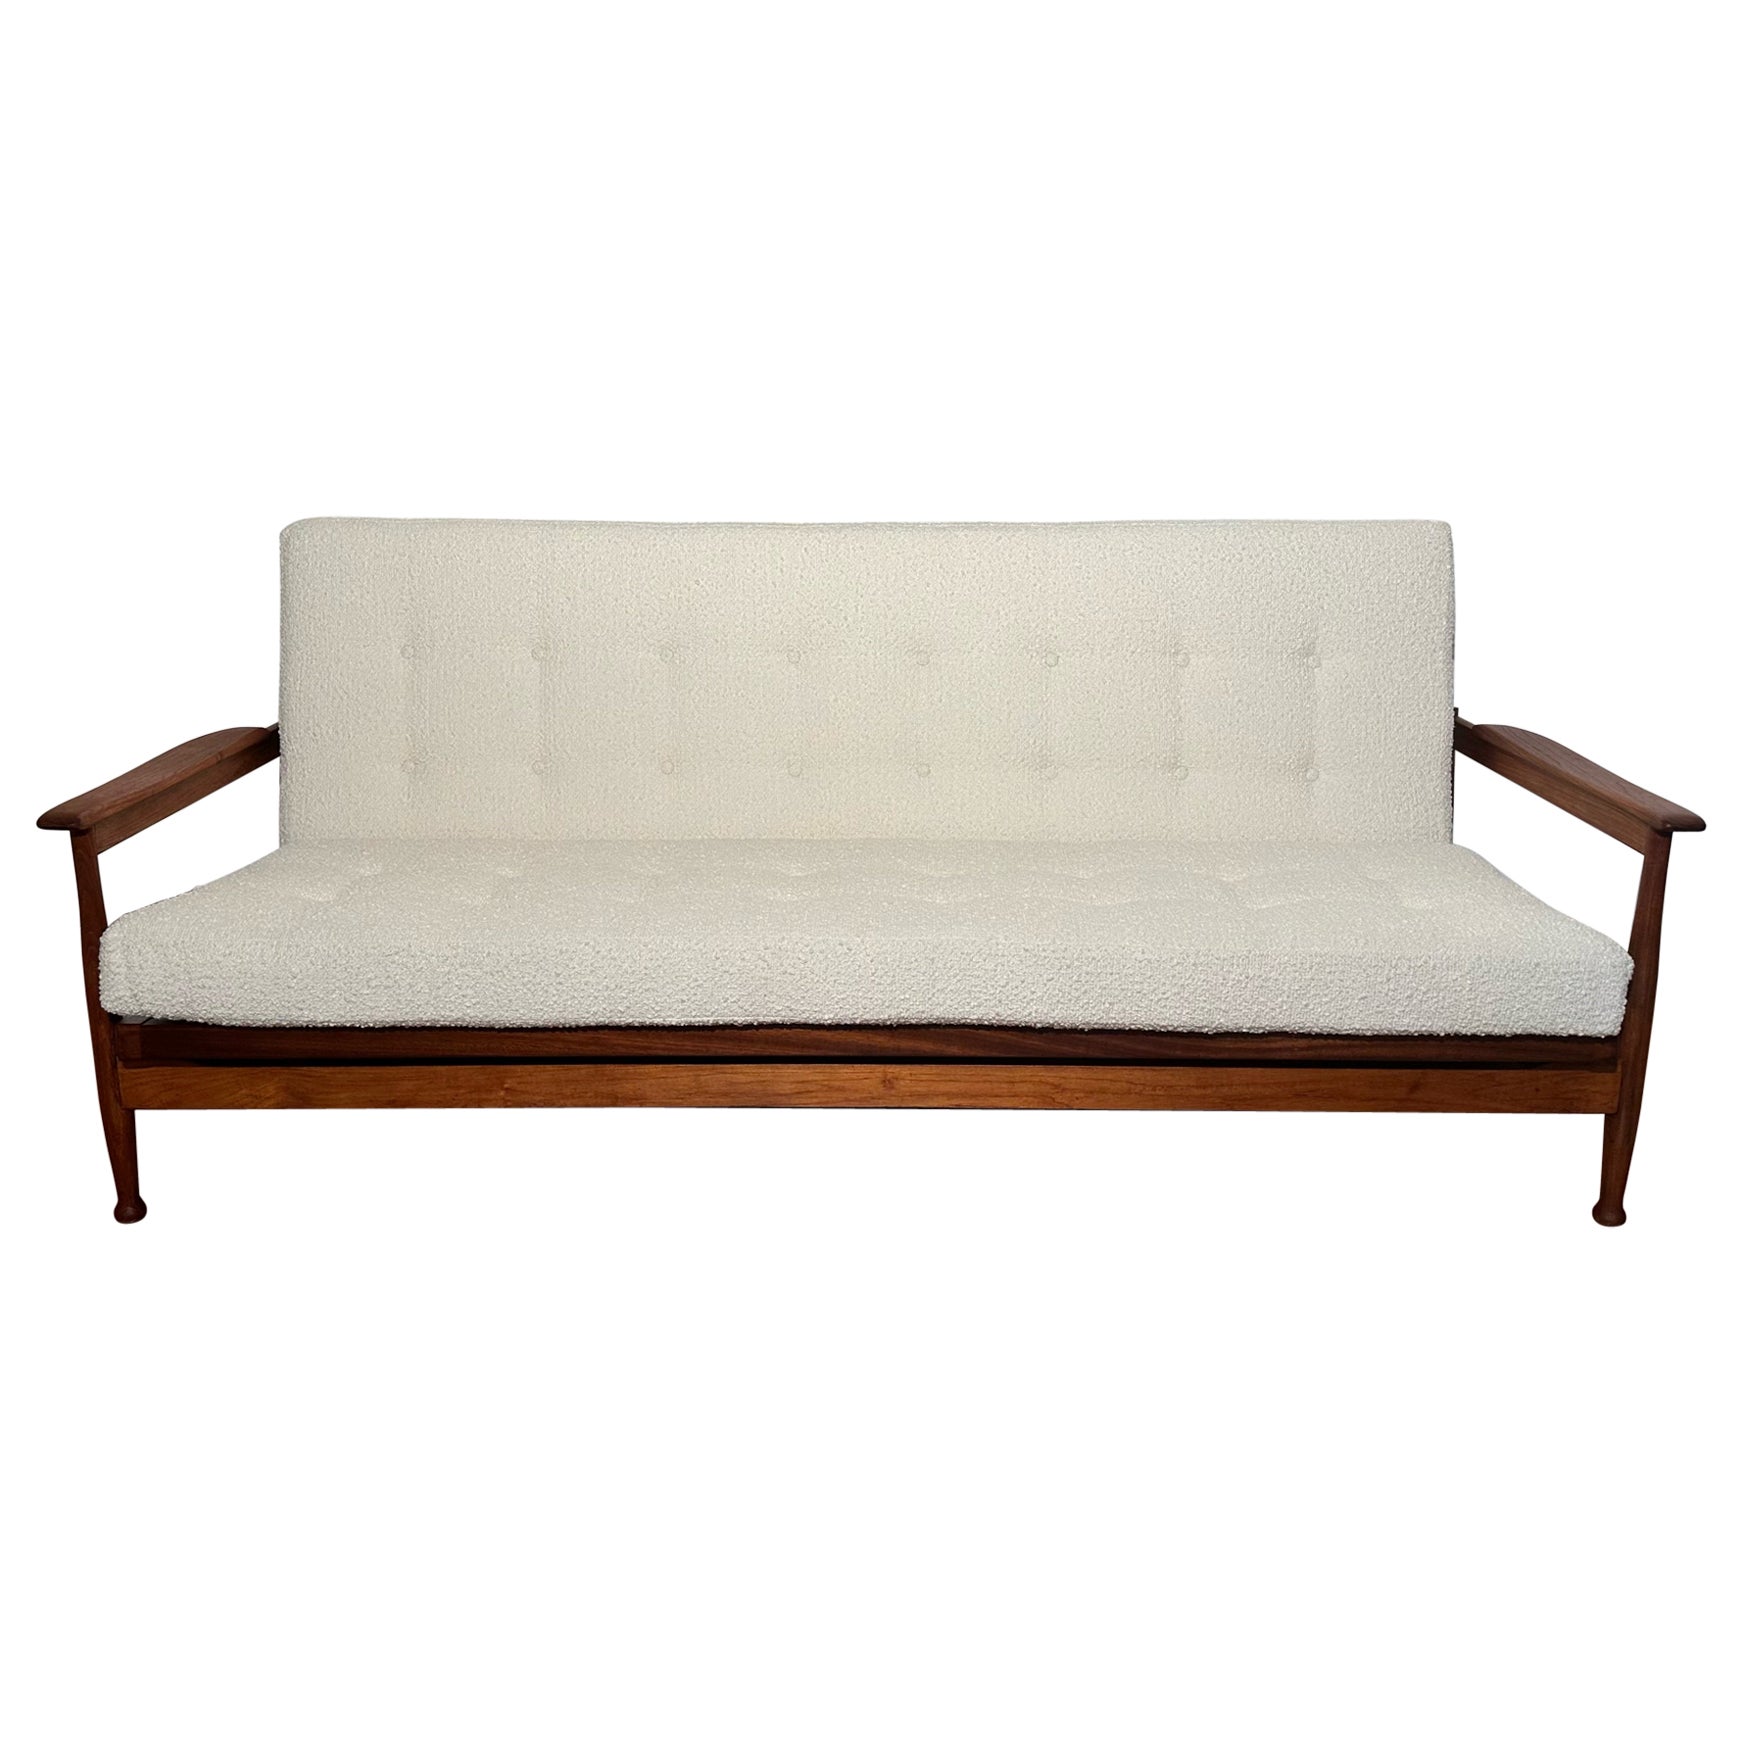 Mid Century Modern 1960’s Teak ‘Manhattan’ Sofa Bed by Guy Rogers For Sale